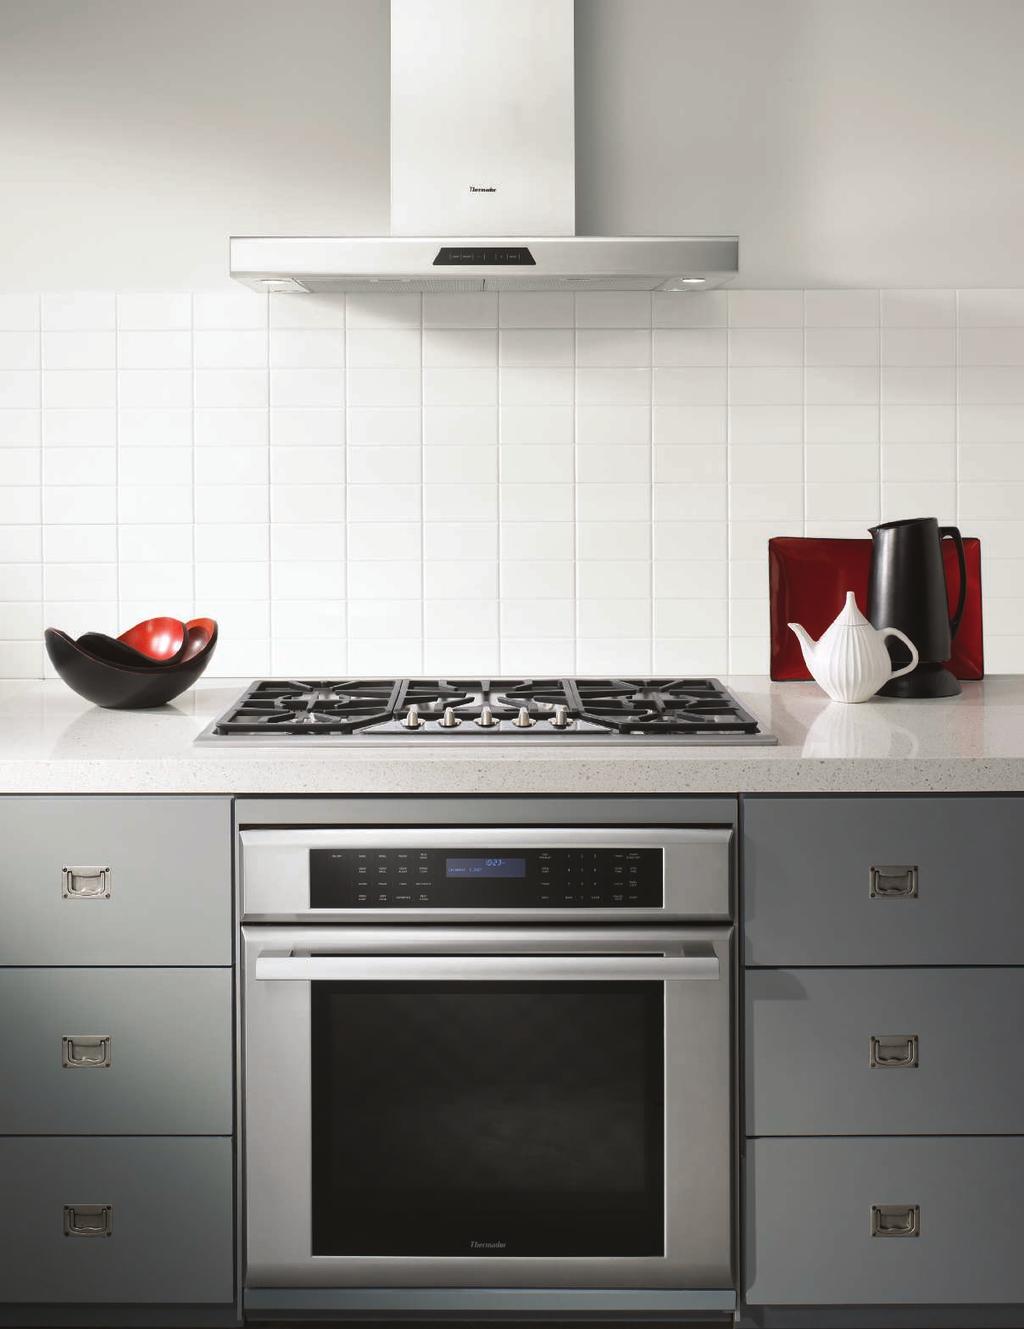 110 36-INCH GAS Cooktop model SGSX365FS SHowN with